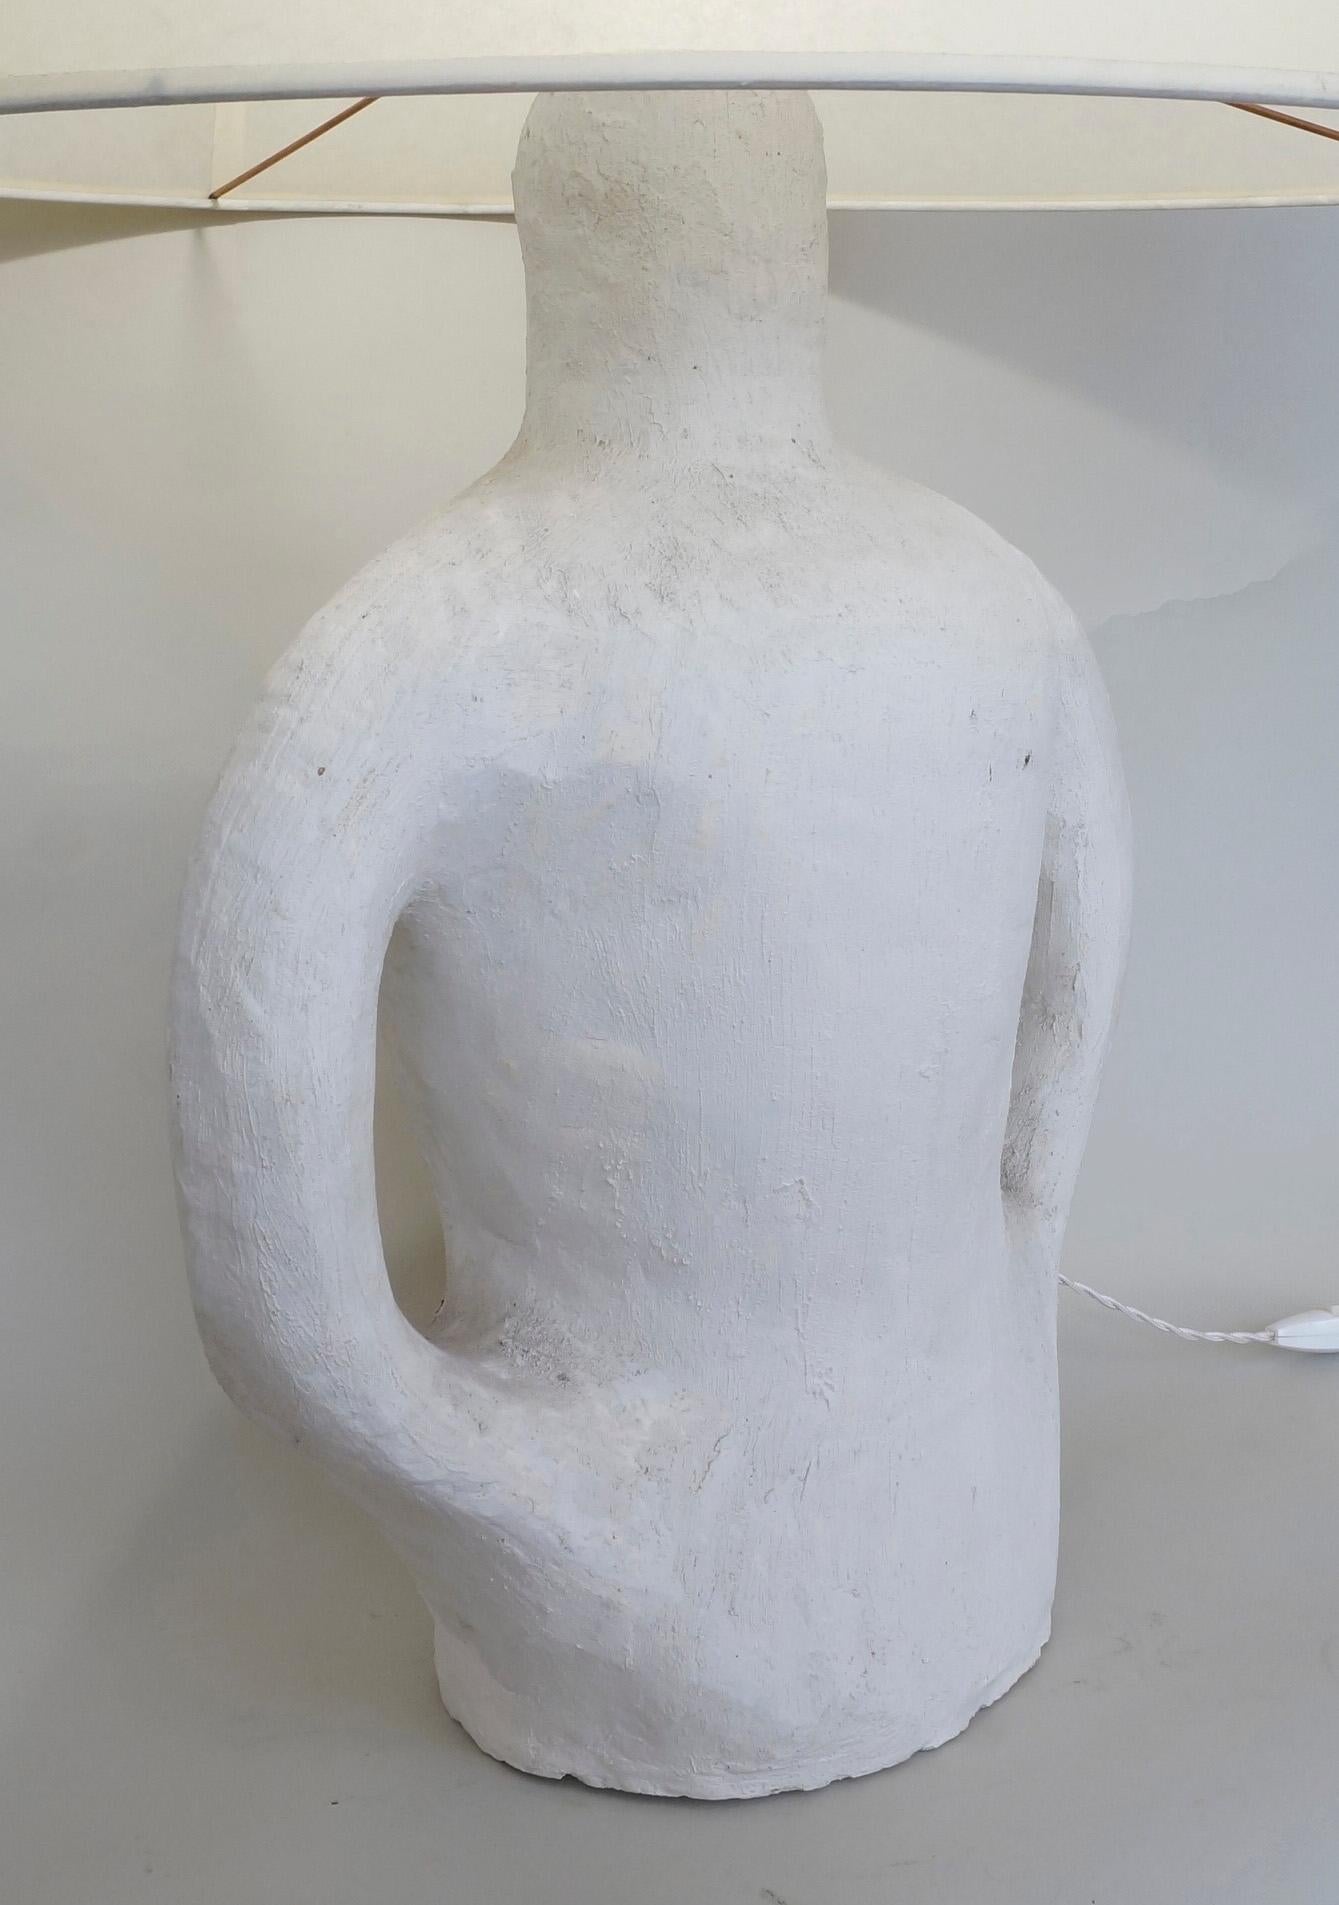 Anthropomorphic plaster table lamp, custom made upholstered lampshade.
Rewired with twisted silk cord
Mesures : plaster height : 47 cm - 18,5in
Height with lampshade : 79 cm - 31,1in.